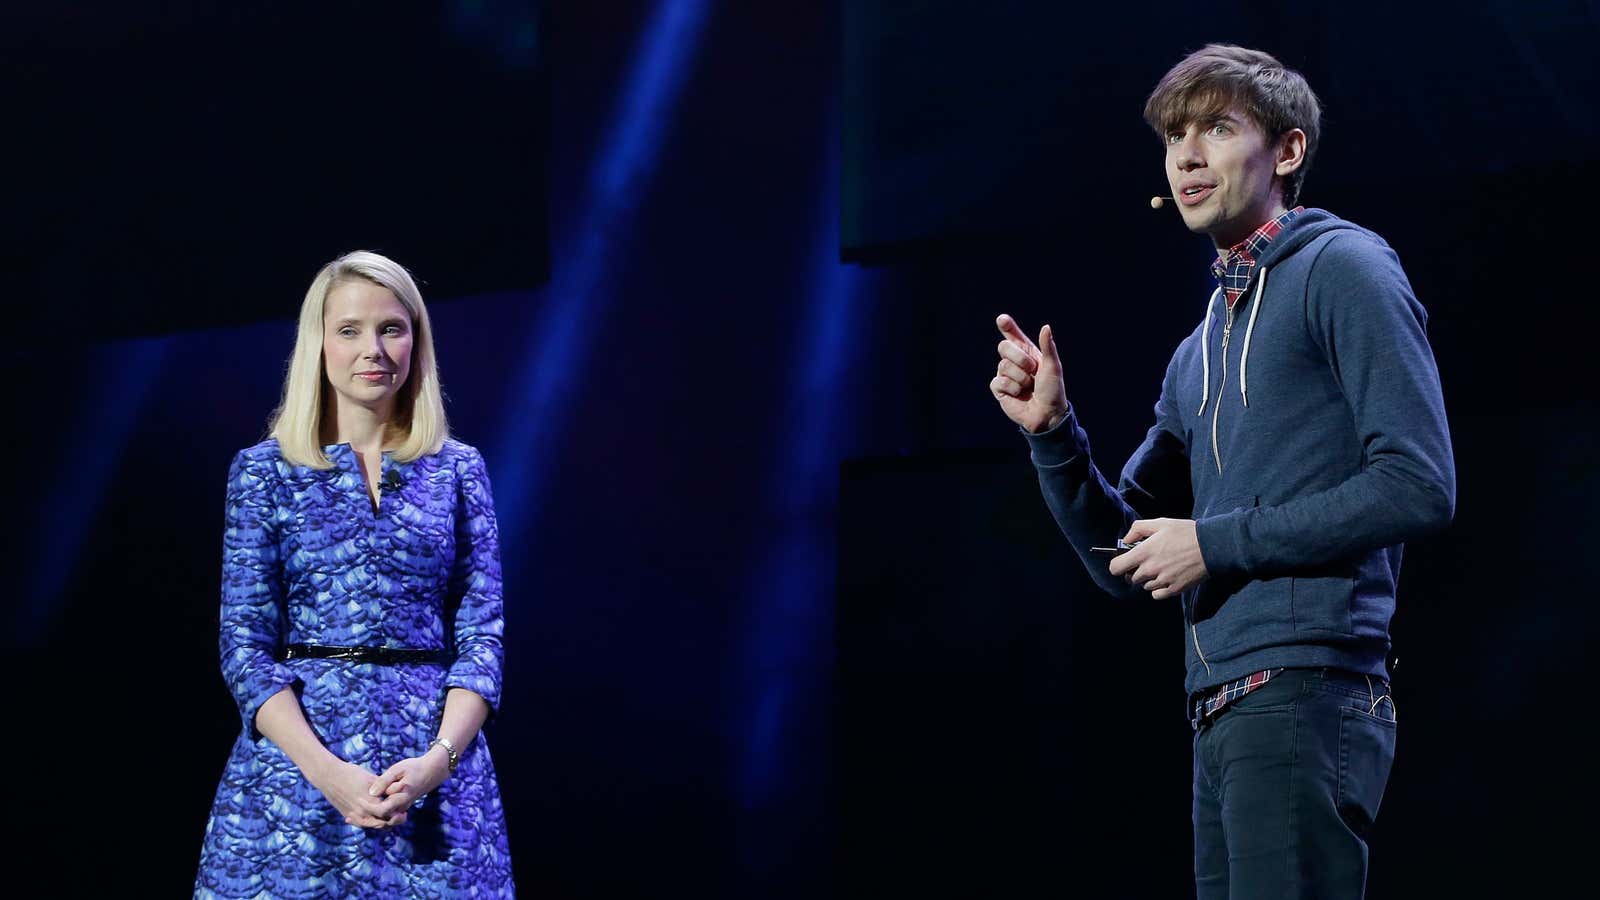 Tumblr could mean something to Yahoo’s bottom line, someday.